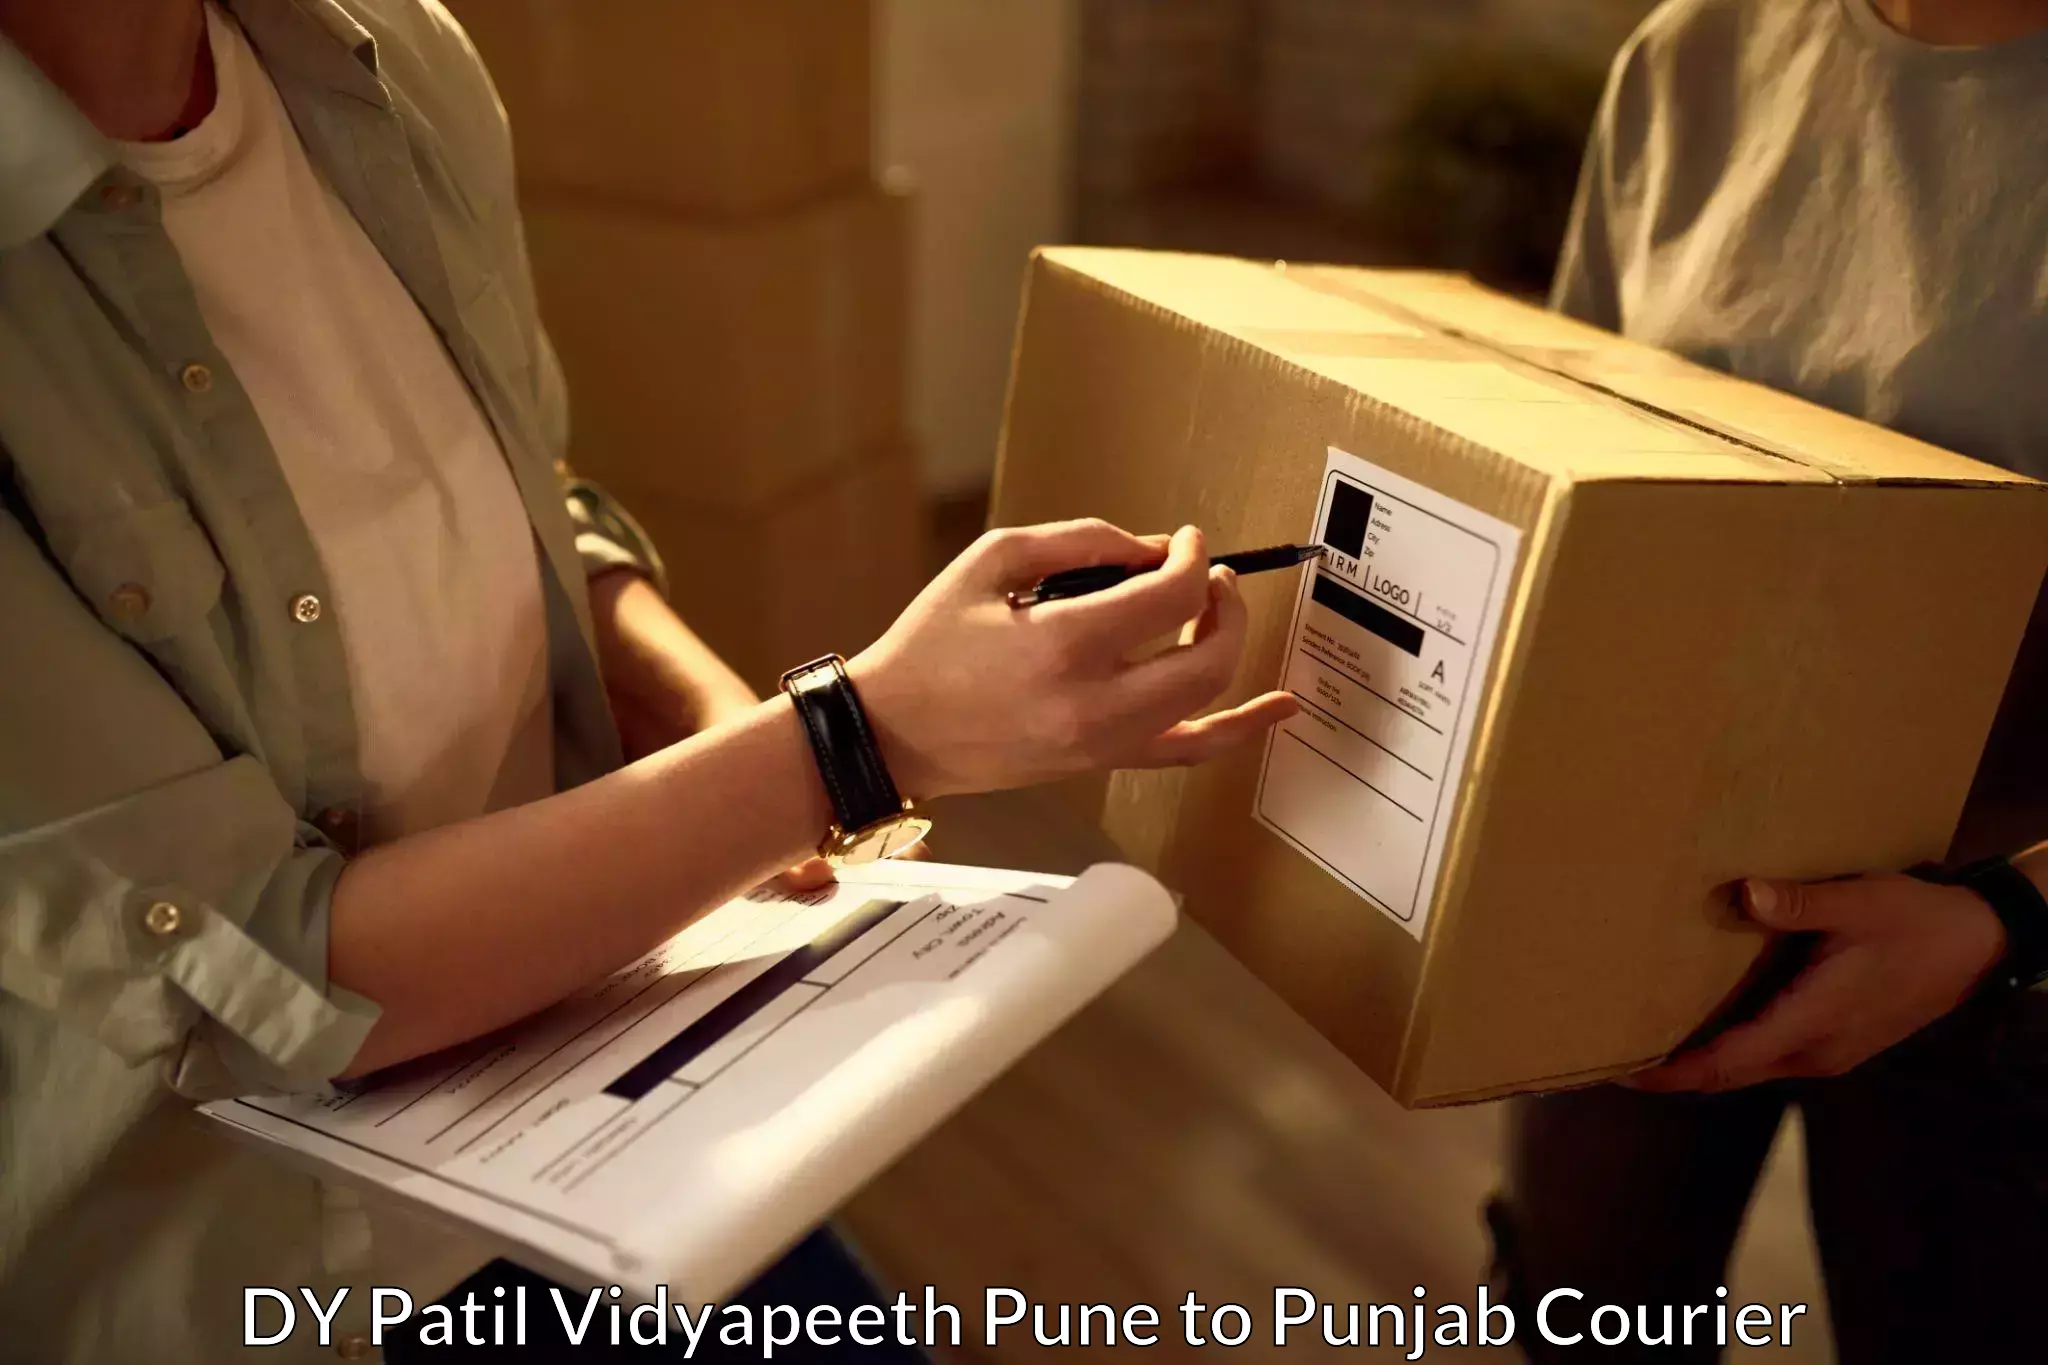 Heavy parcel delivery DY Patil Vidyapeeth Pune to Mehta Chowk